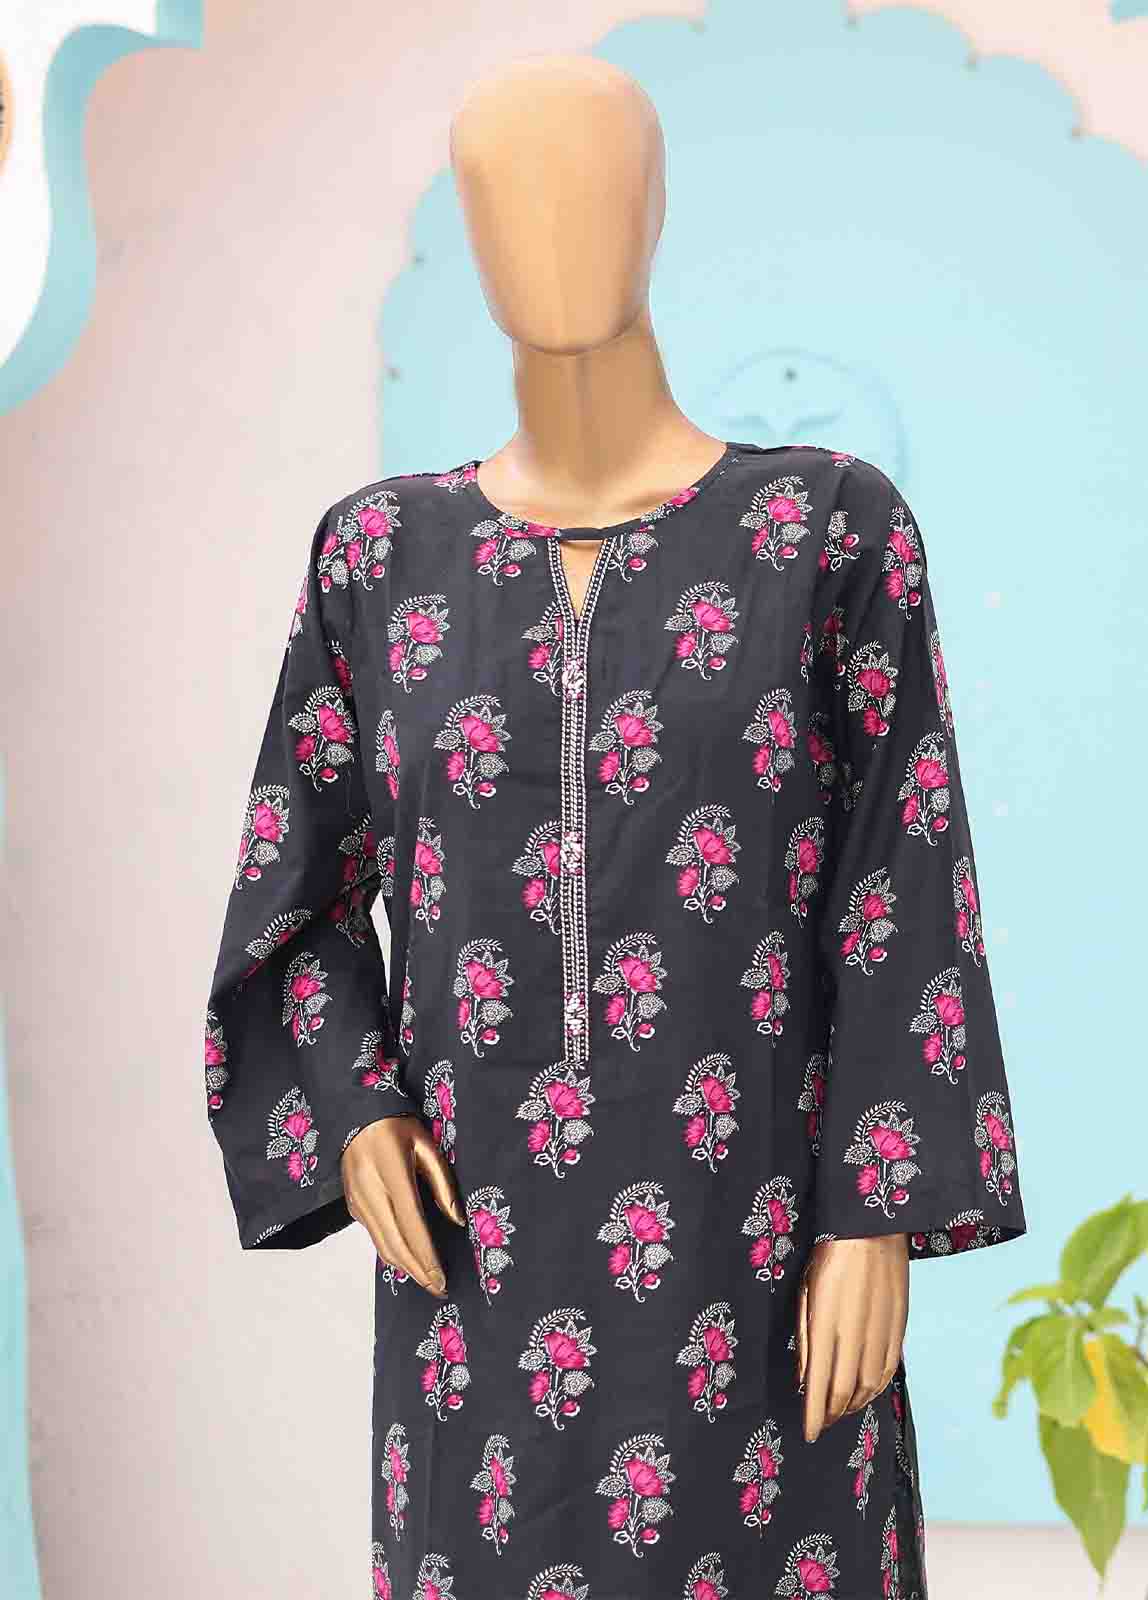 SMK-0125- 2 Piece Printed Stitched Co-ords